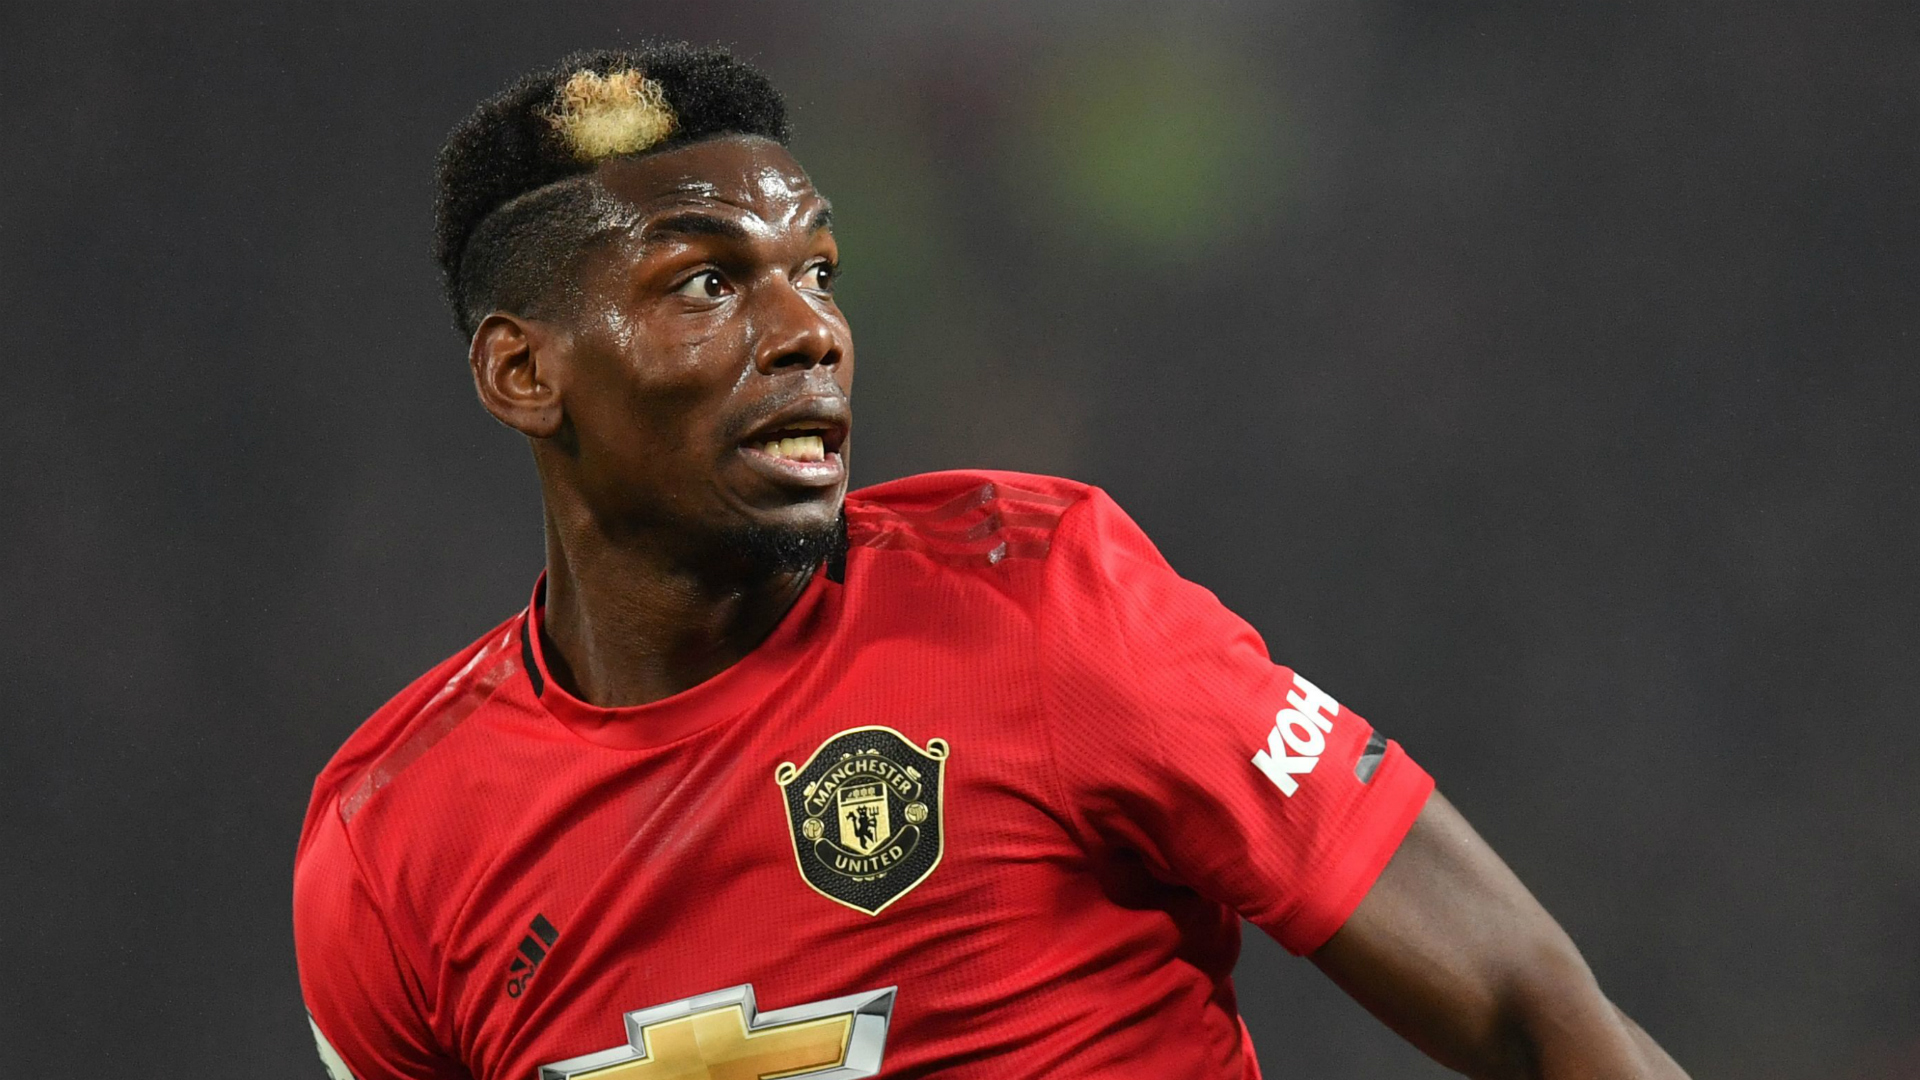 Man utd ready to sell pogba and lingard to raise funds for sancho - Bóng Đá